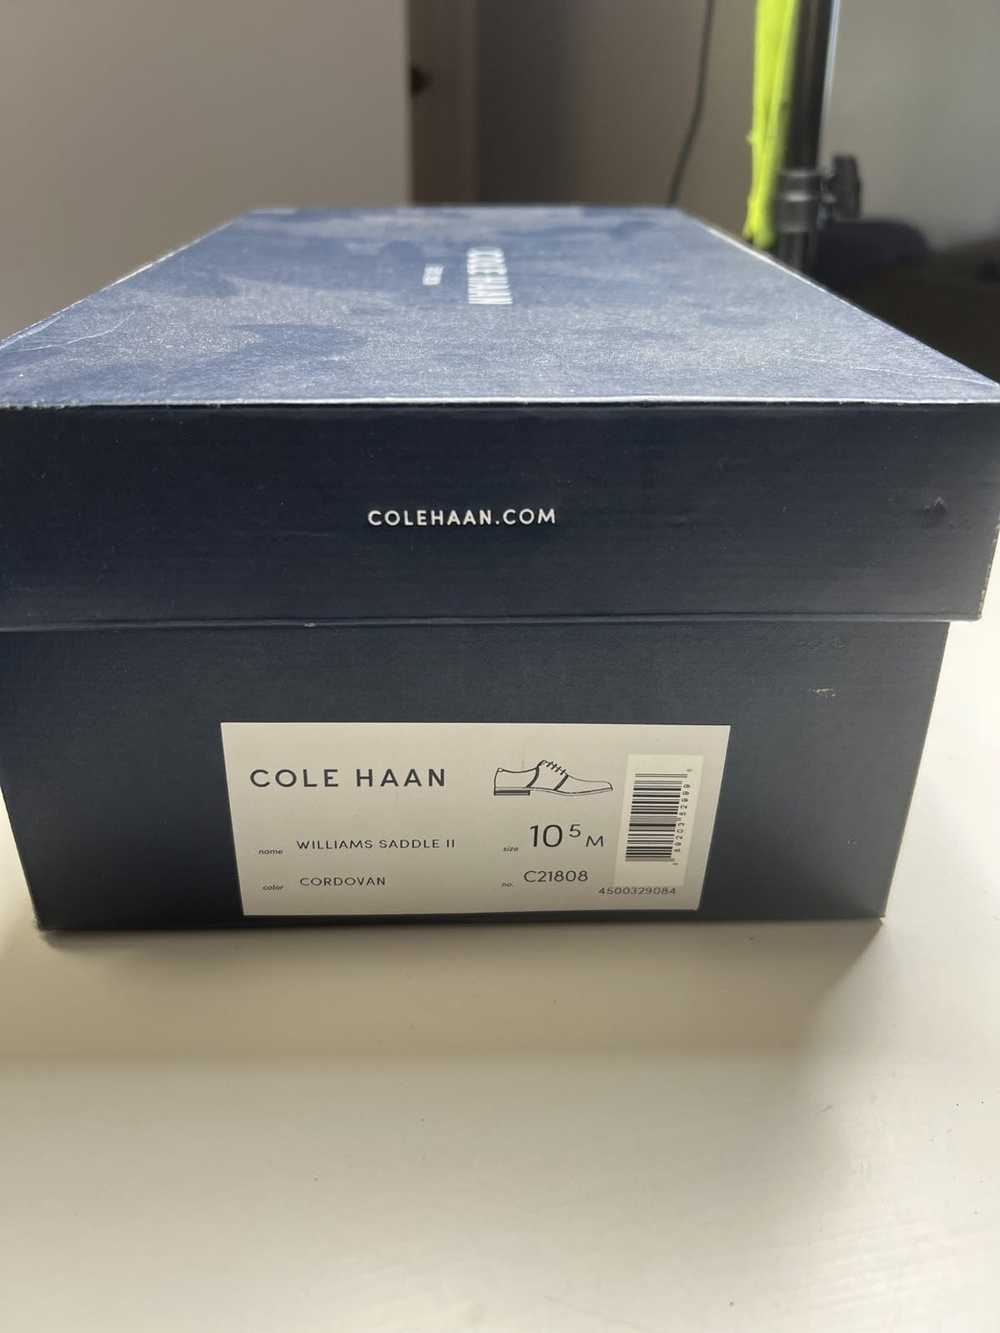 Cole Haan Cole Haan Williams saddle ll cordovan - image 6